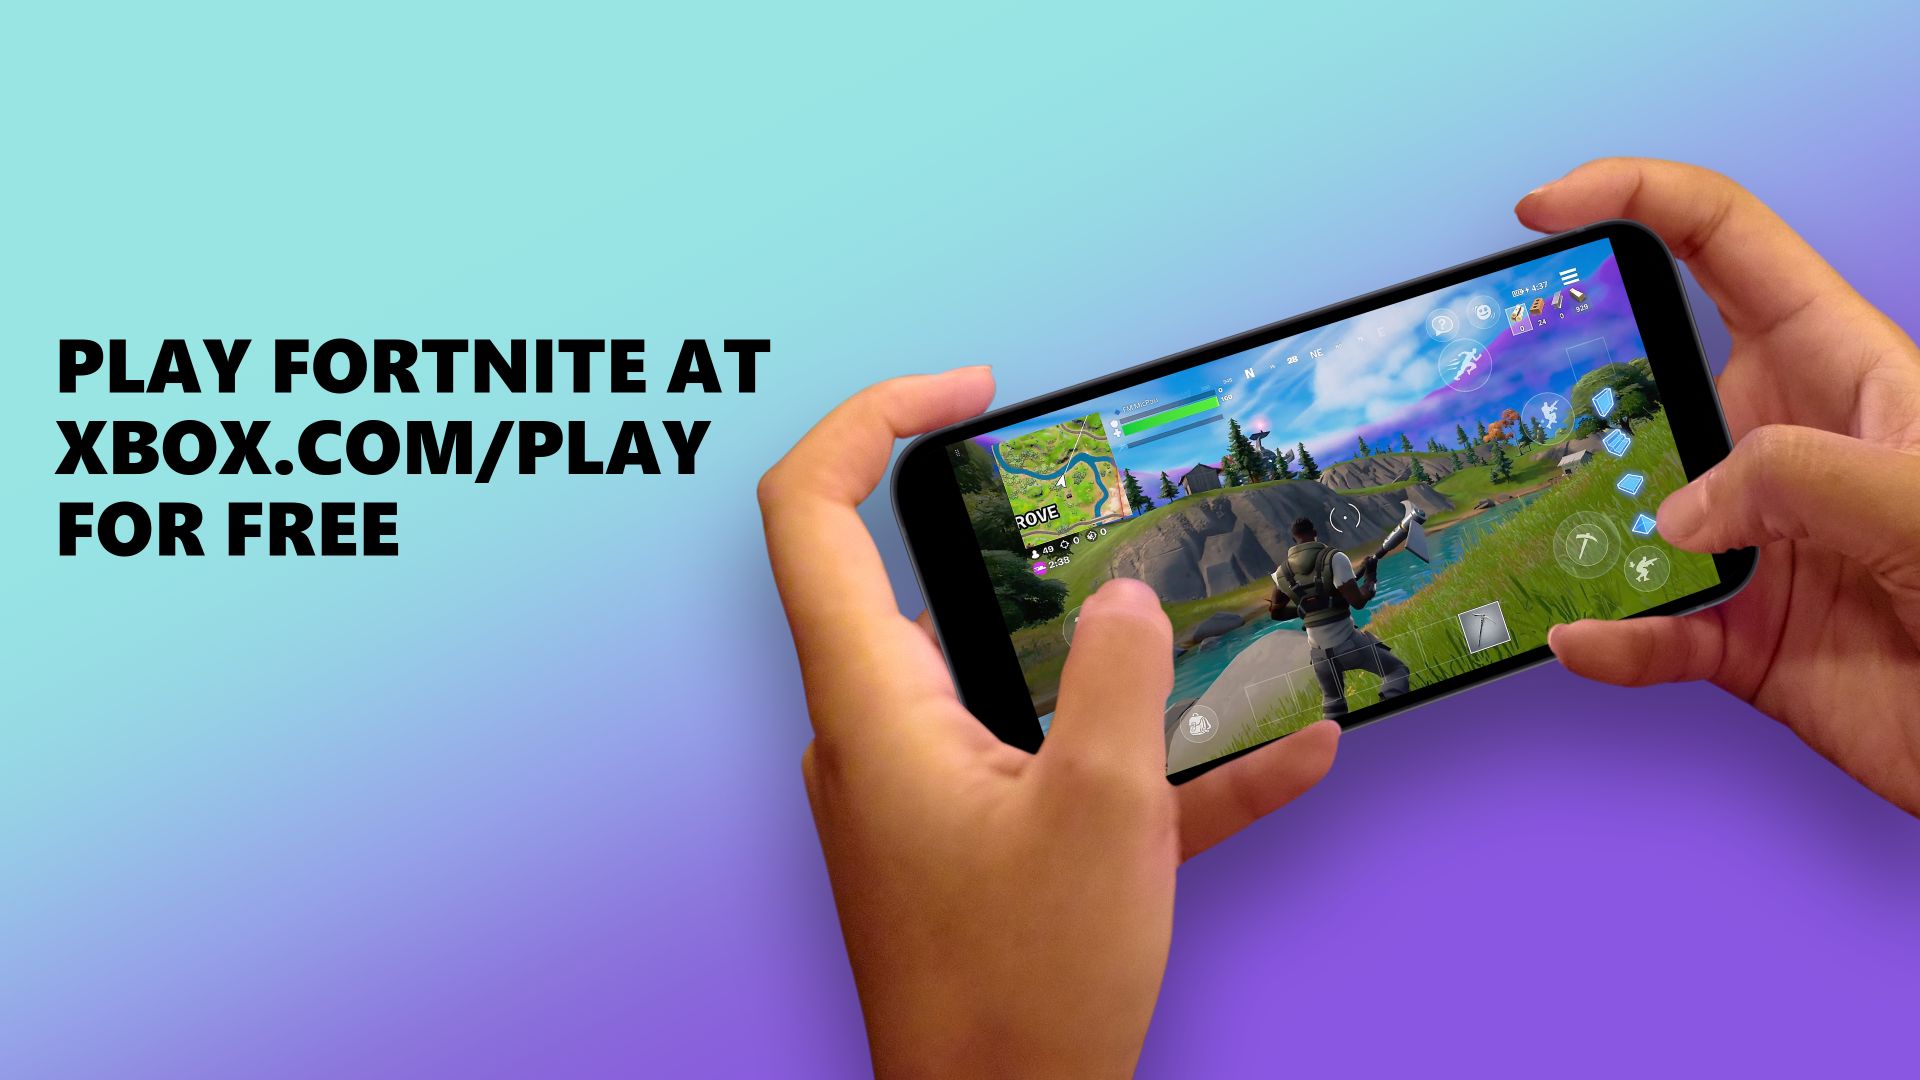 Video For Play Fortnite on iOS, iPadOS, Android Phones and Tablets, and Windows PC with Xbox Cloud Gaming for Free